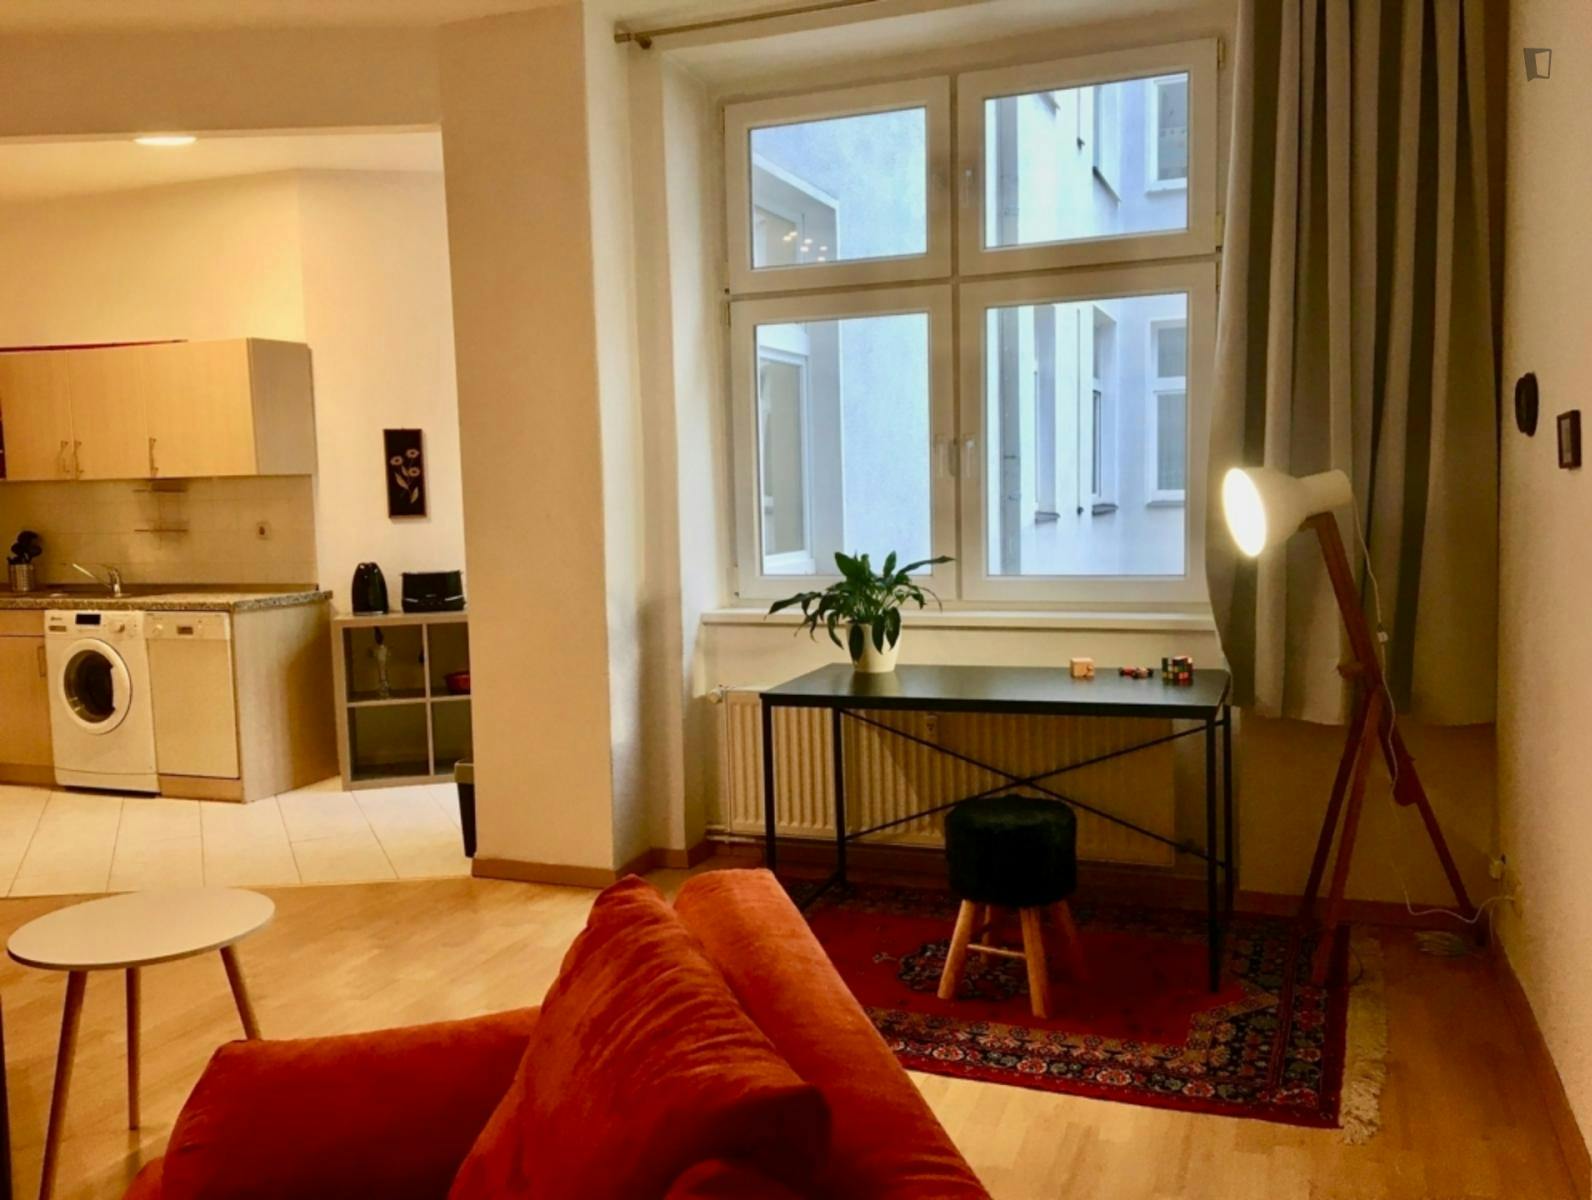 Lovely 1-bedroom apartment in the district of Prenzlauer Berg